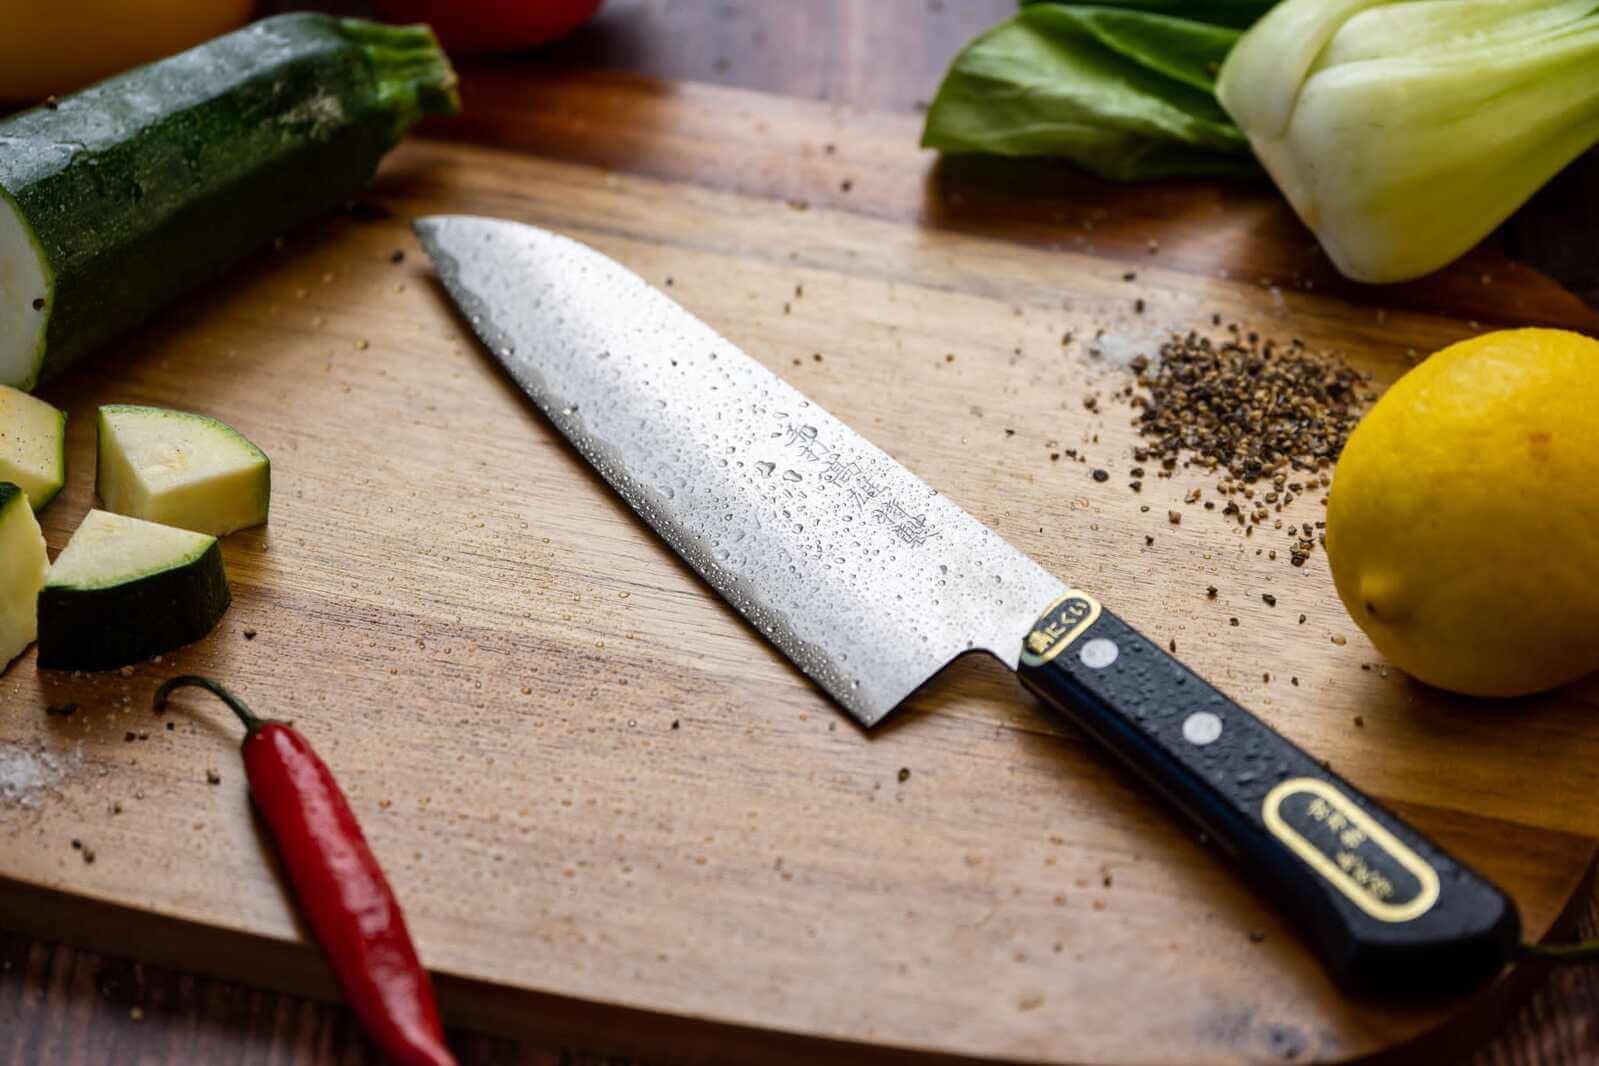 Japanese knife on a cutting board surrounded by vegetables